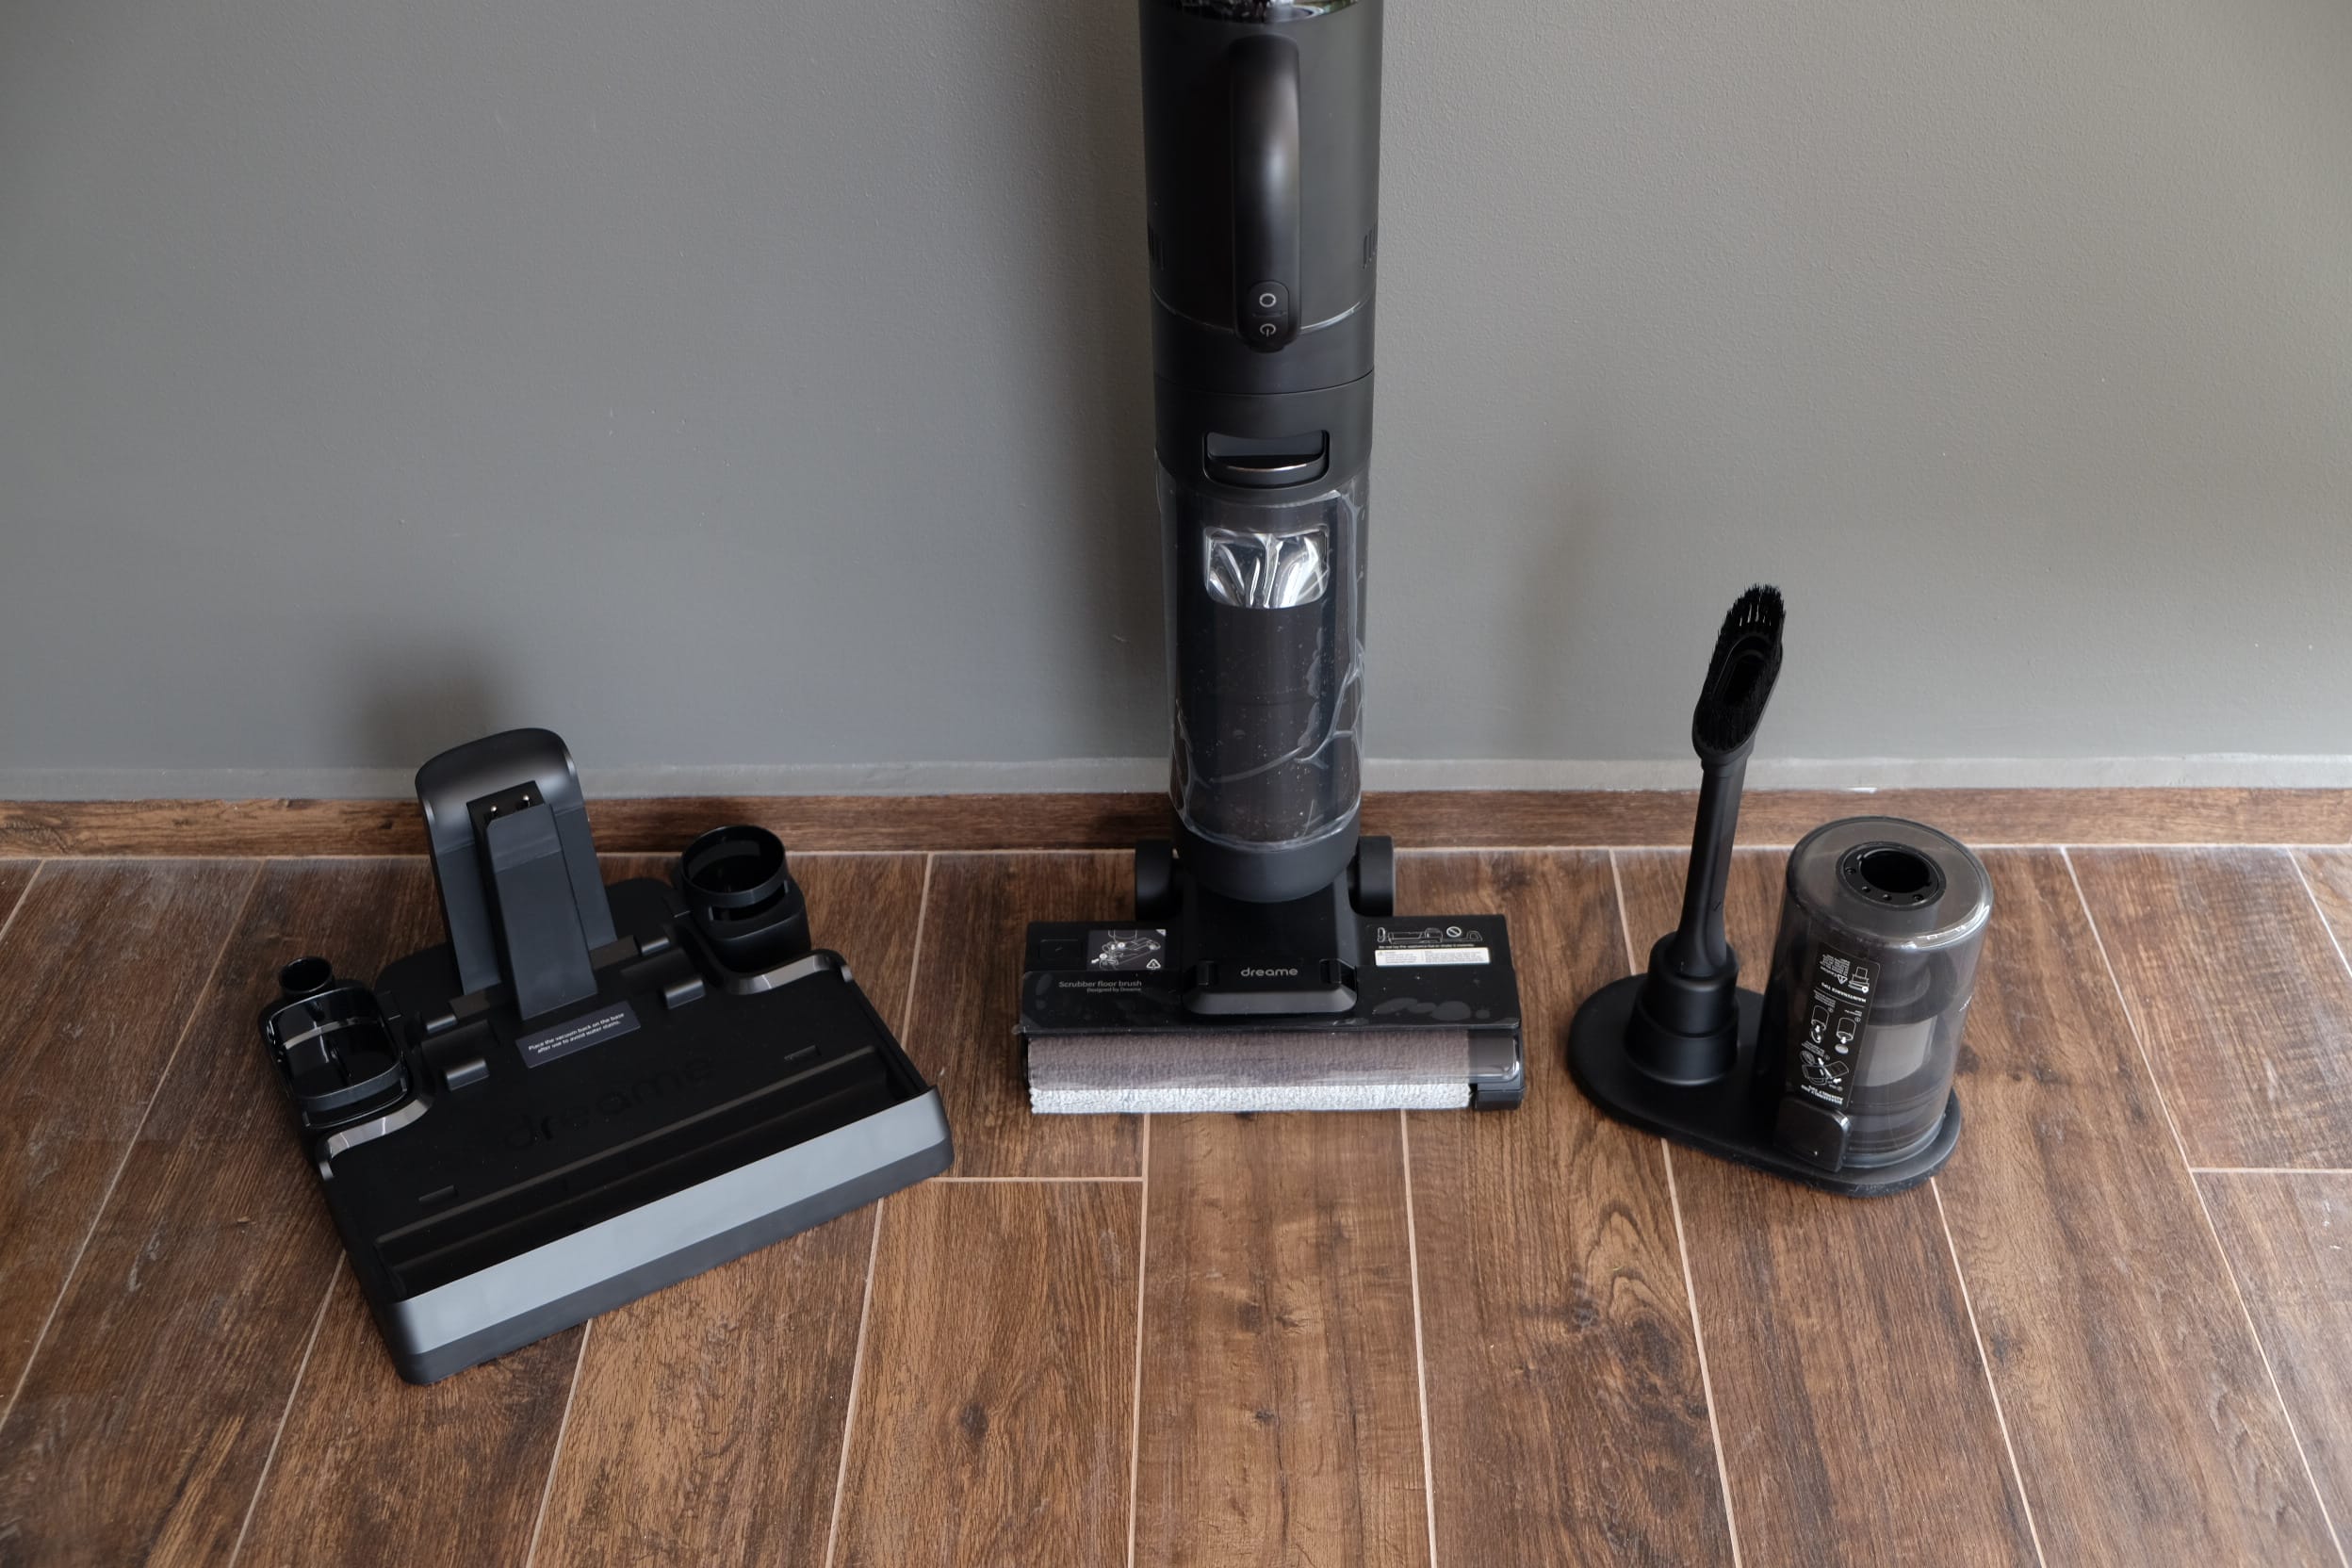 Review: Dreame M12 Dry Wet Tech 2-in-1 Vacuum Jio & – Cleaner